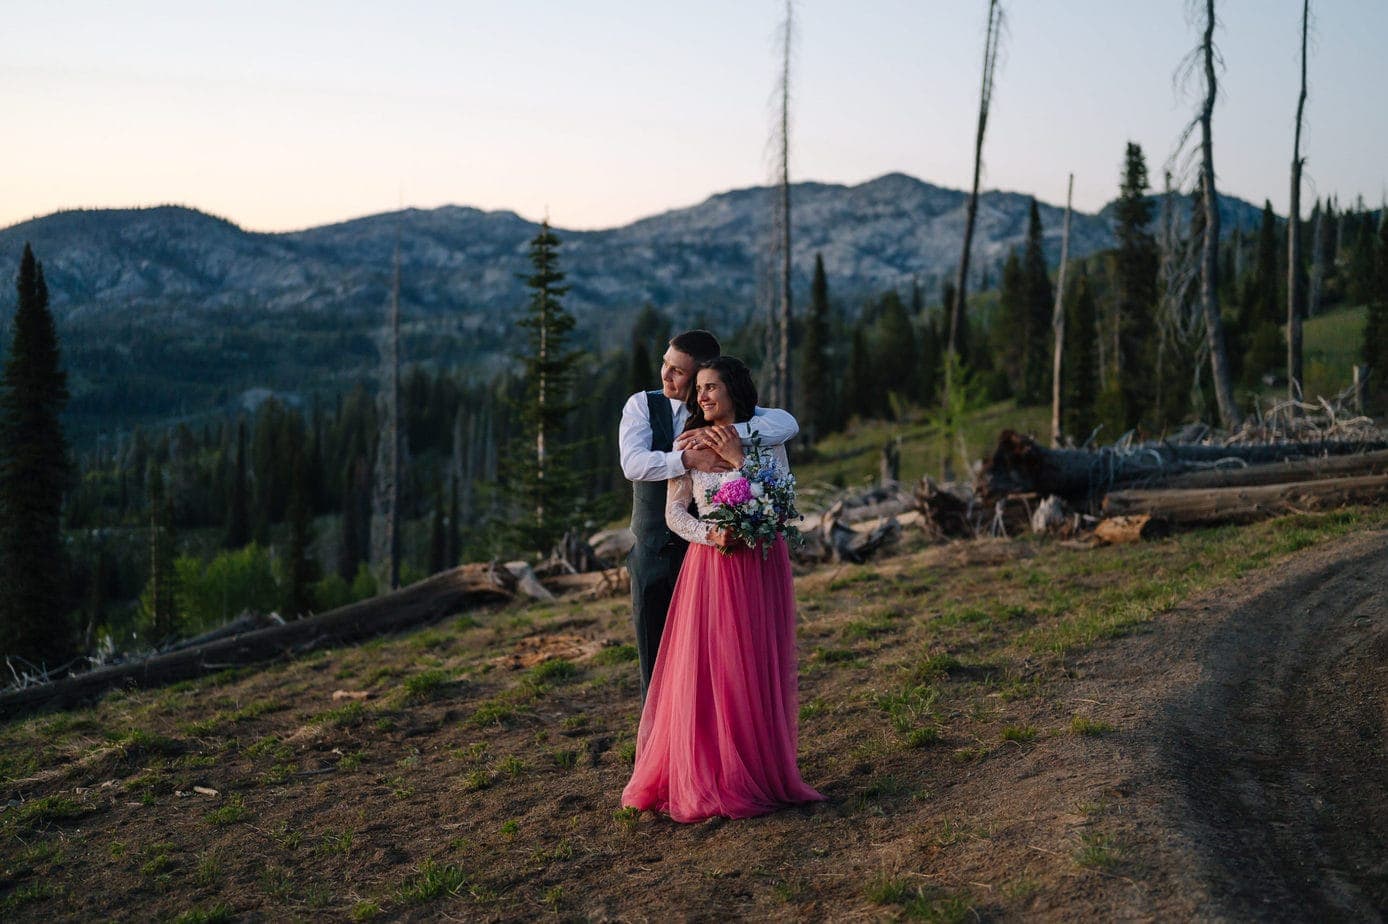 Couple stands together with the setting sun on their faces during their McCall elopement. There are mountains behind them. Bride is wearing a pink skirt and groom is wearing a dark green suite.